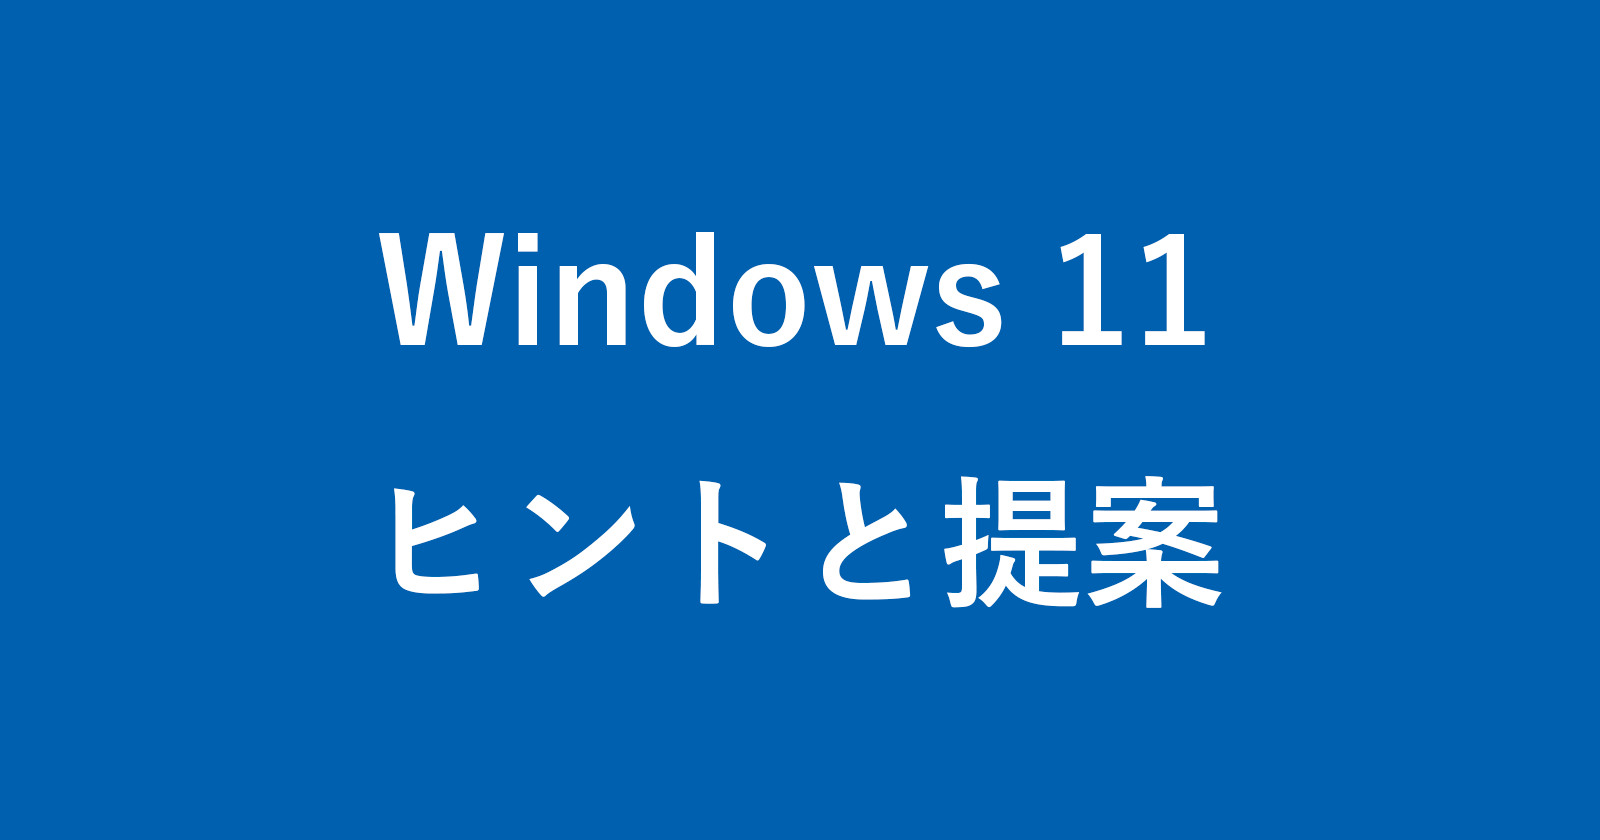 windows 11 tips suggestions